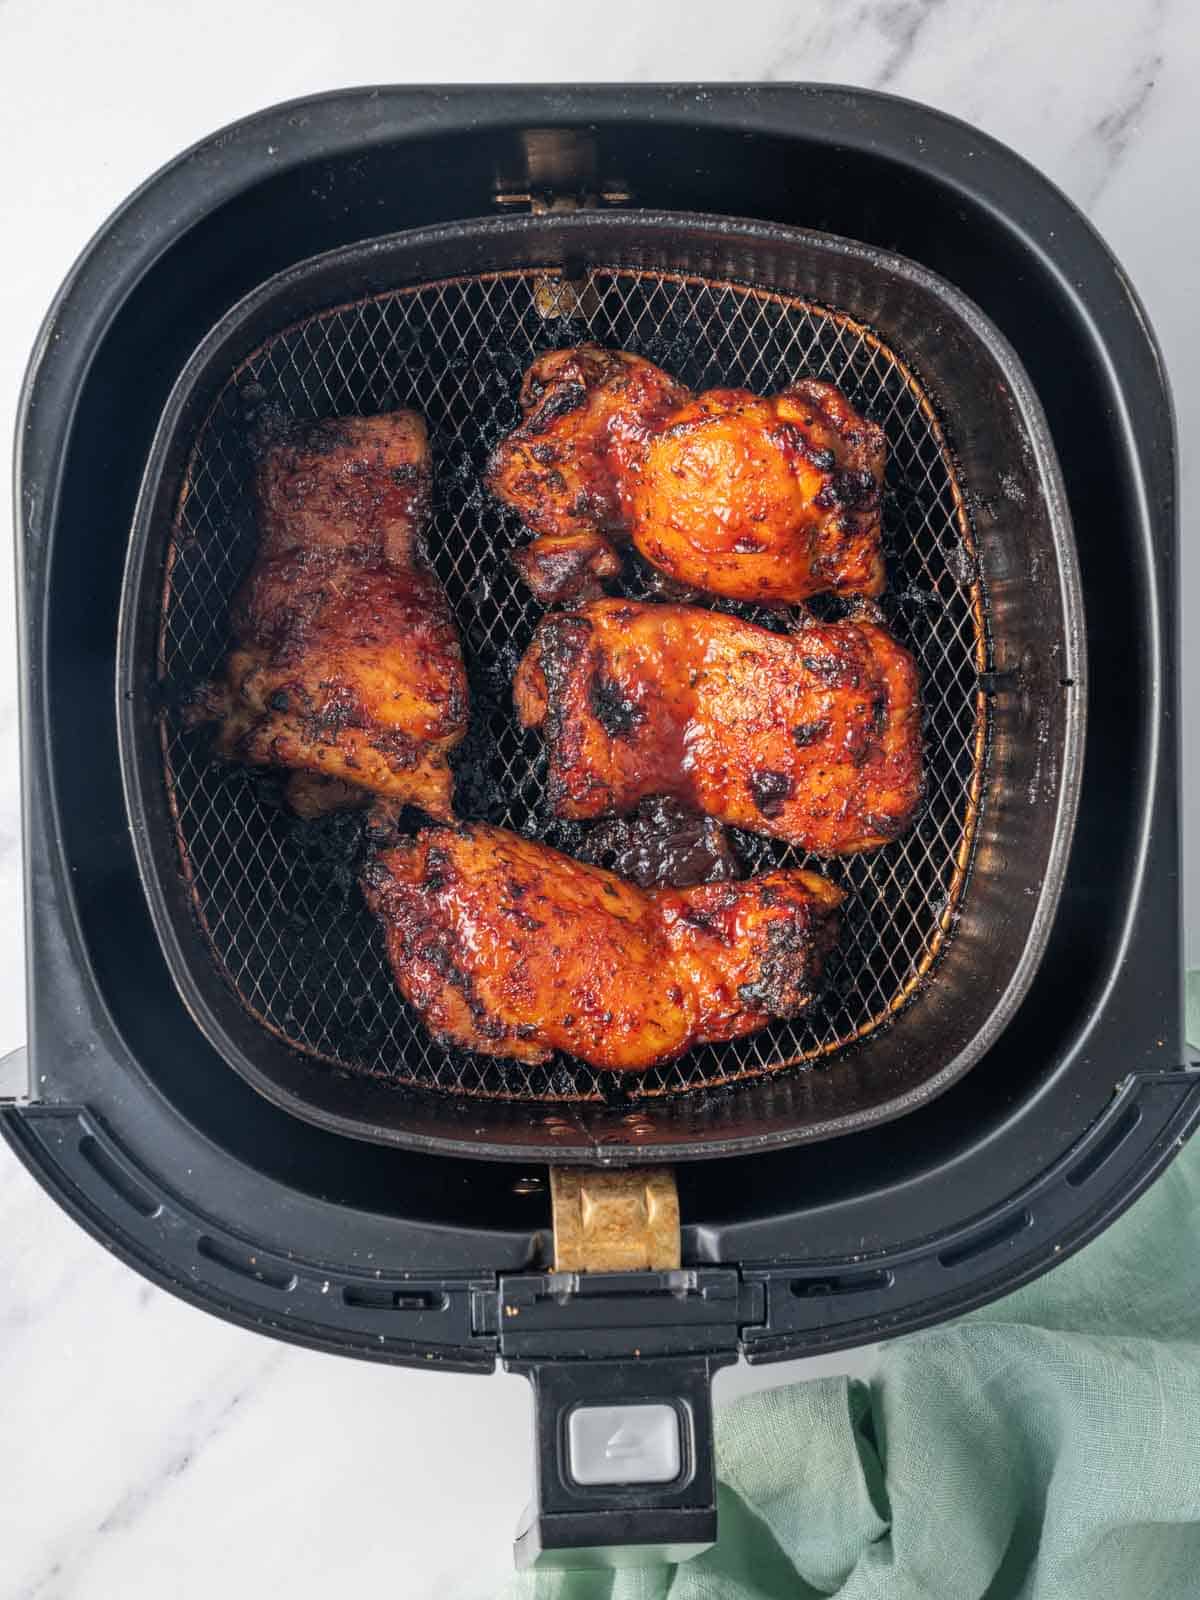 Finished bbq chicken thighs resting in an air fryer basket.